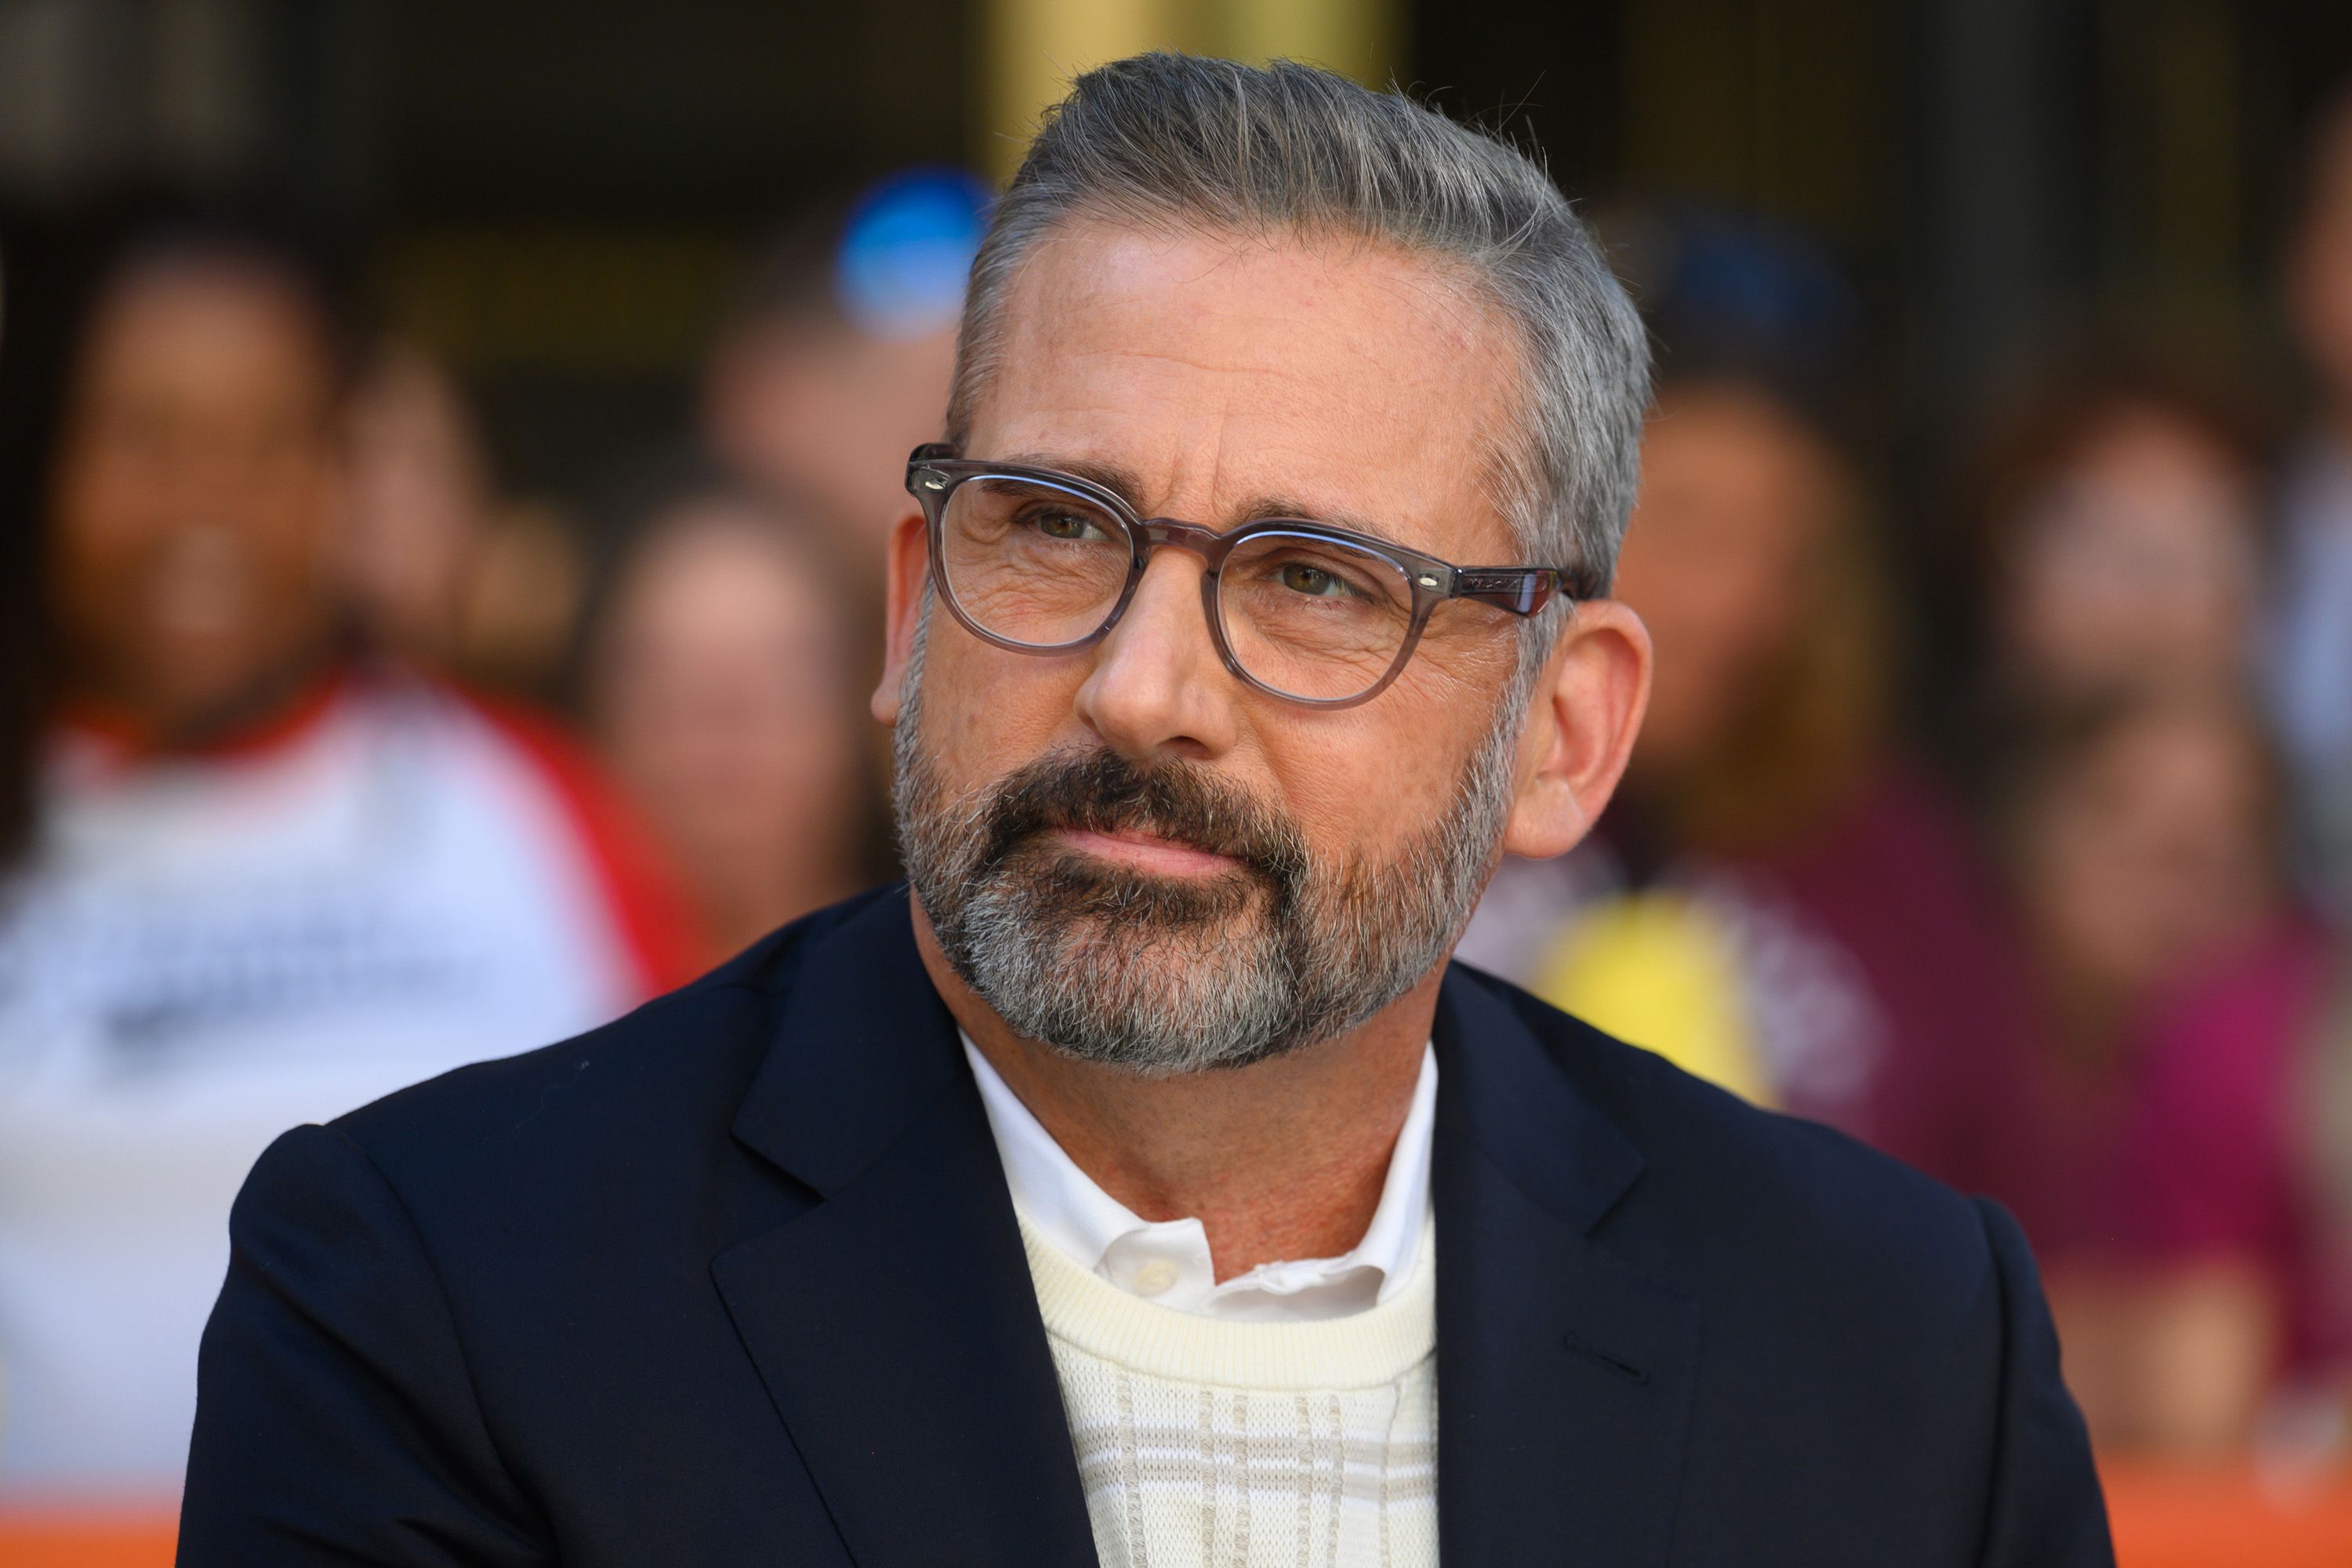 Steve Carell pictured on June 28, 2022 | Source: Getty Images